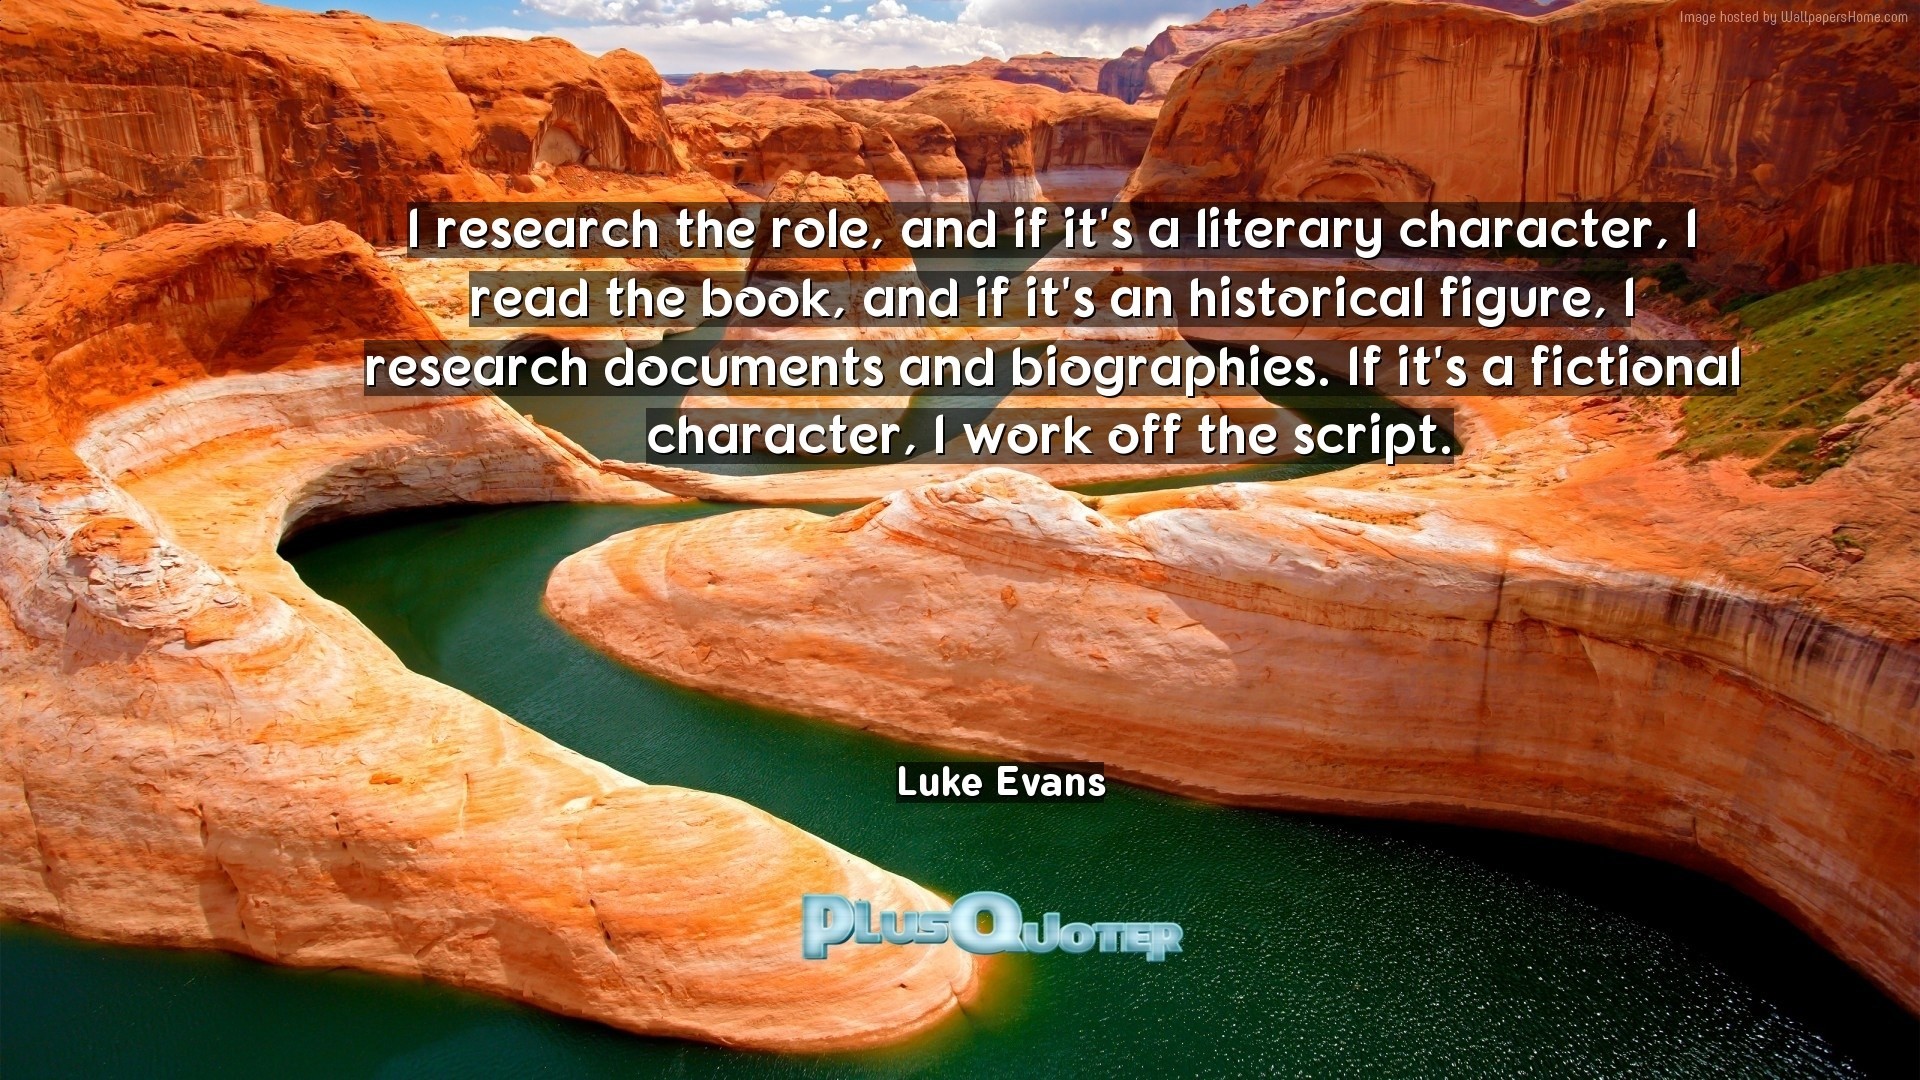 1920x1080 Download Wallpaper with inspirational Quotes- "I research the role, and if  it